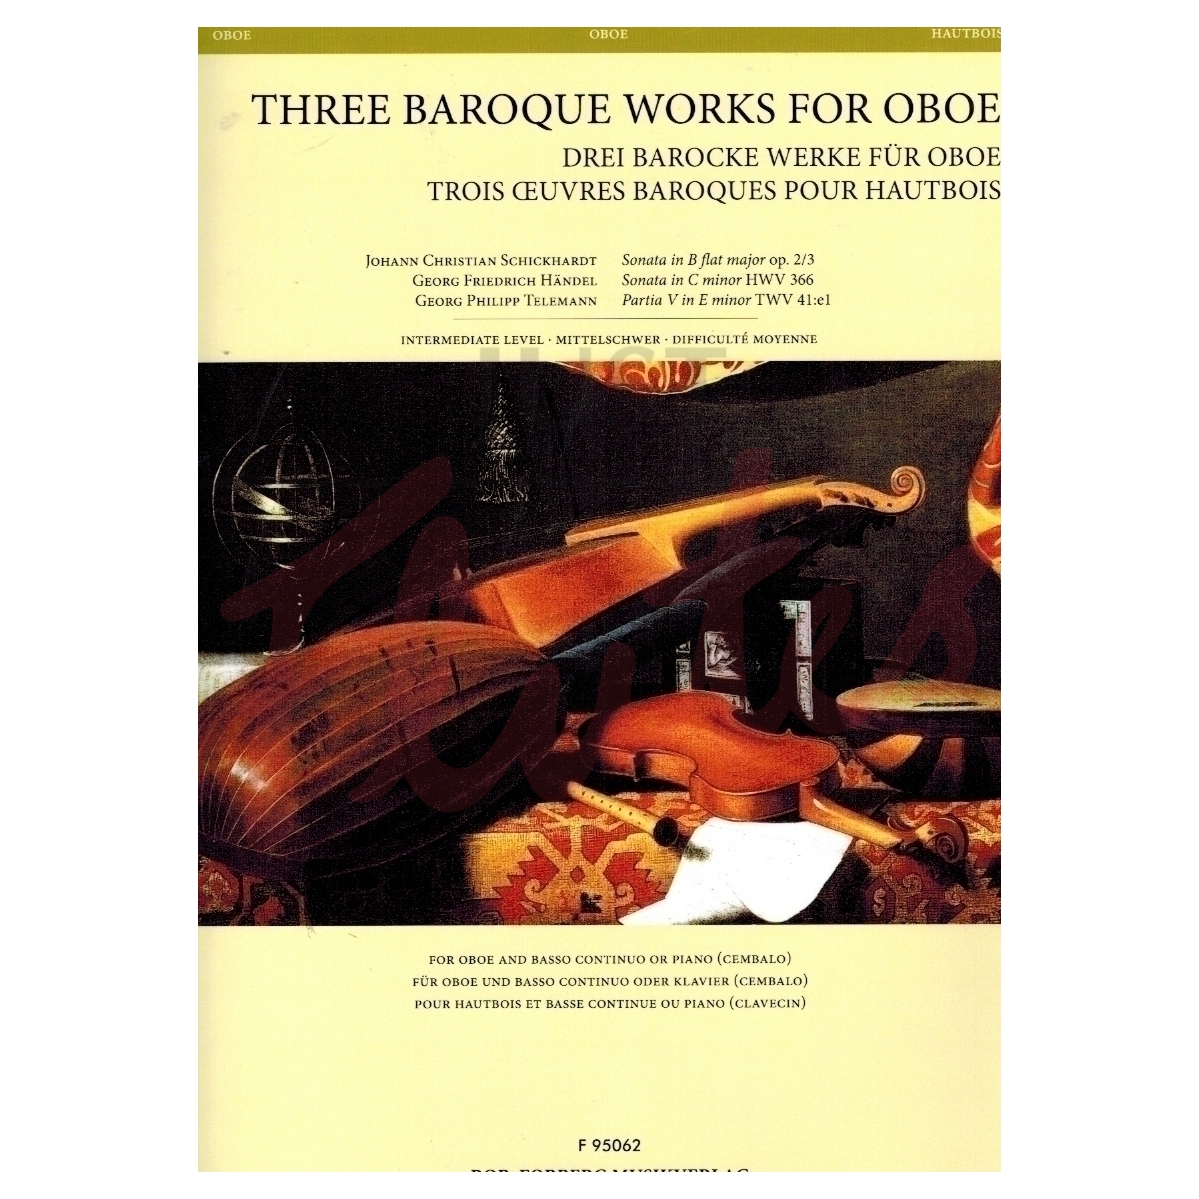 Three Baroque Works for Oboe